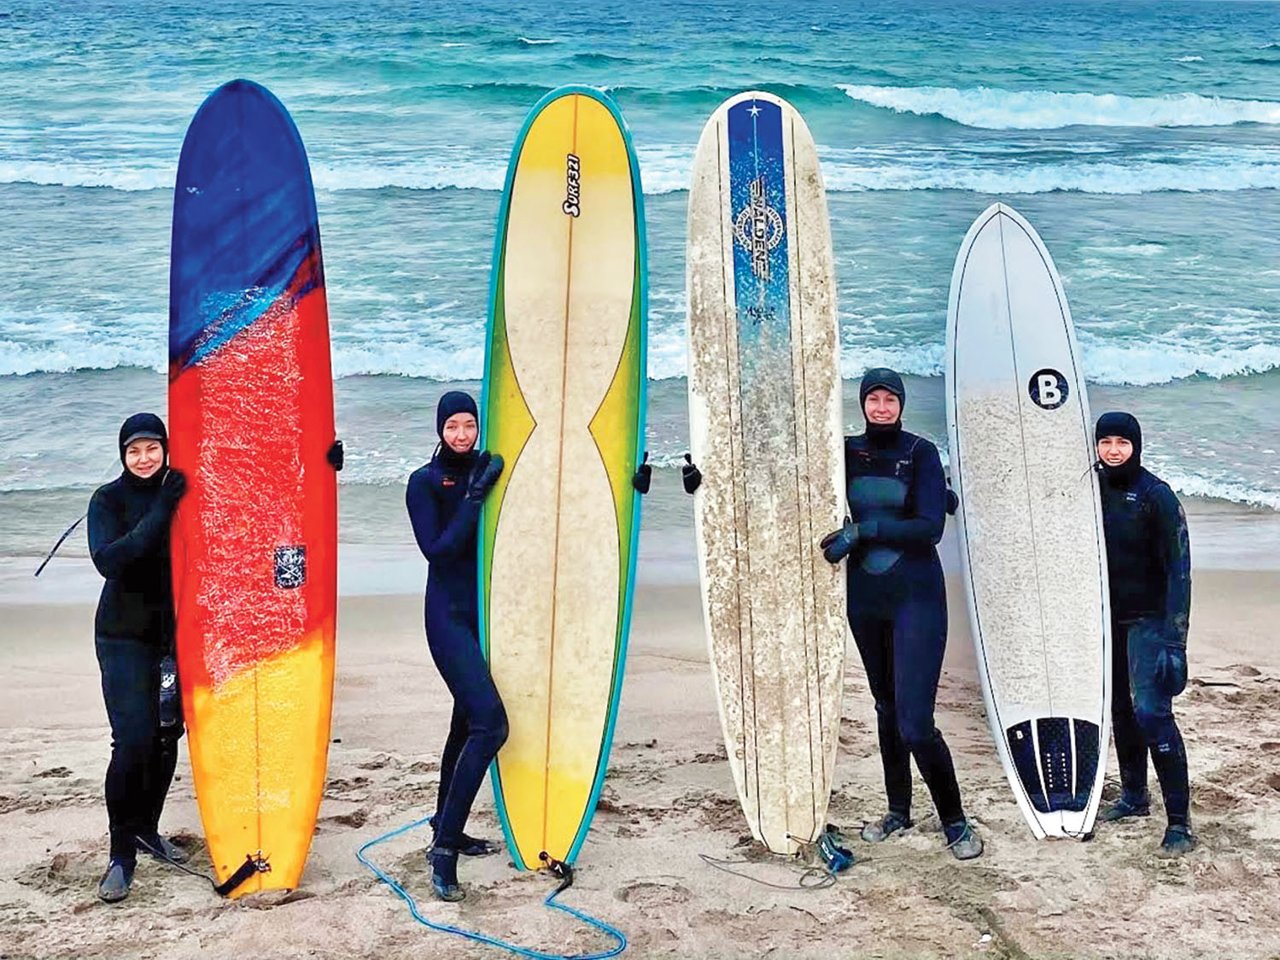 Four women in wetsuits holding surfboards standing on a beach in front of a lake